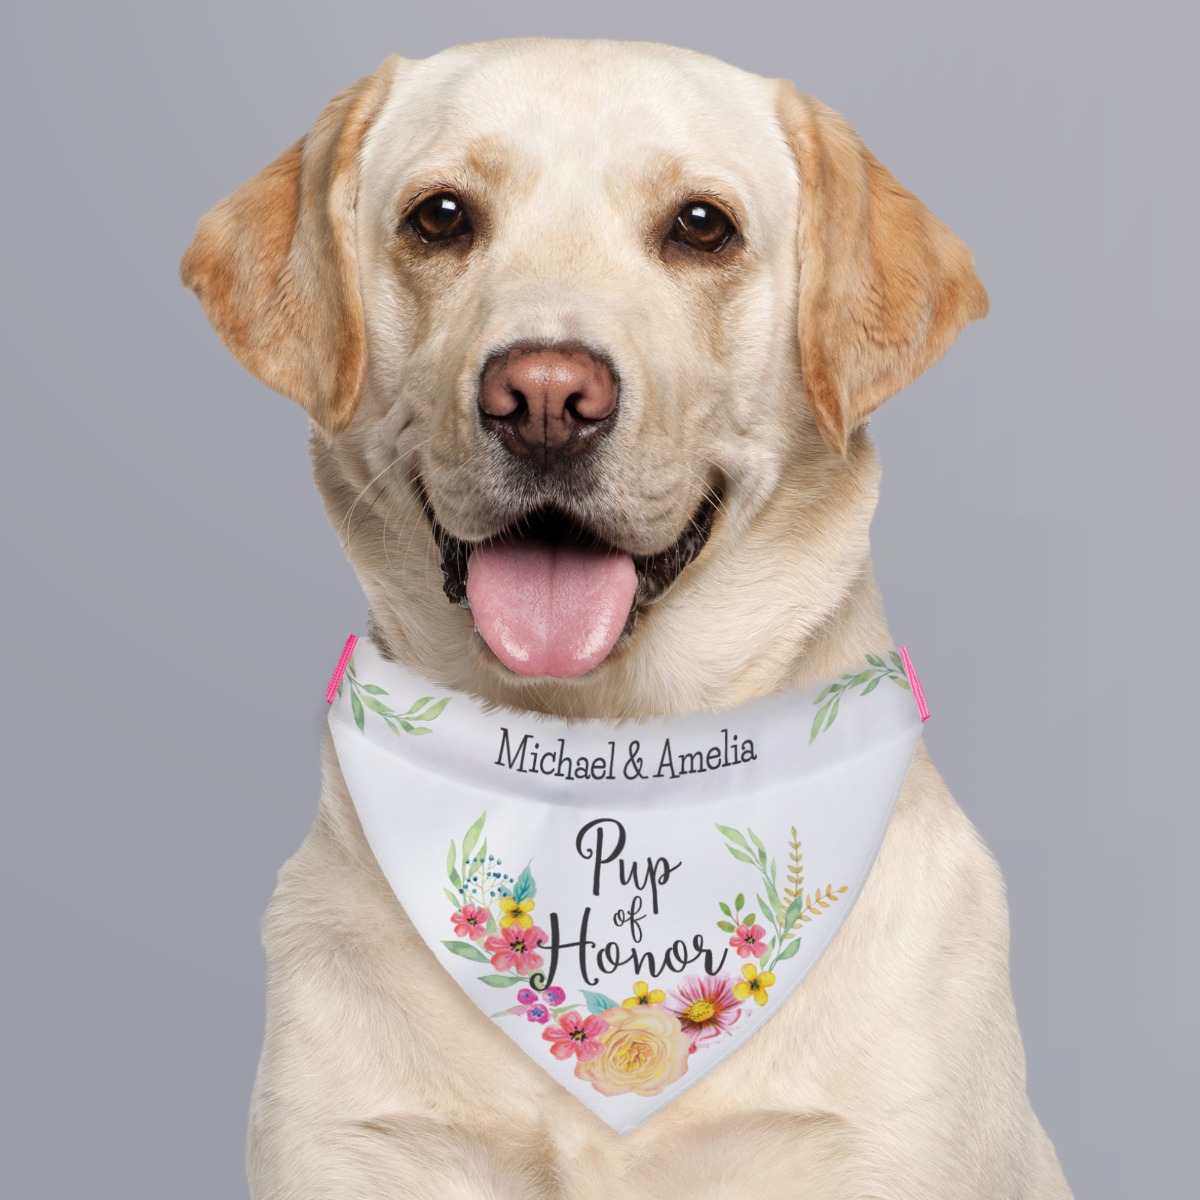 Pup of Honor Floral Personalized Dog Bandana